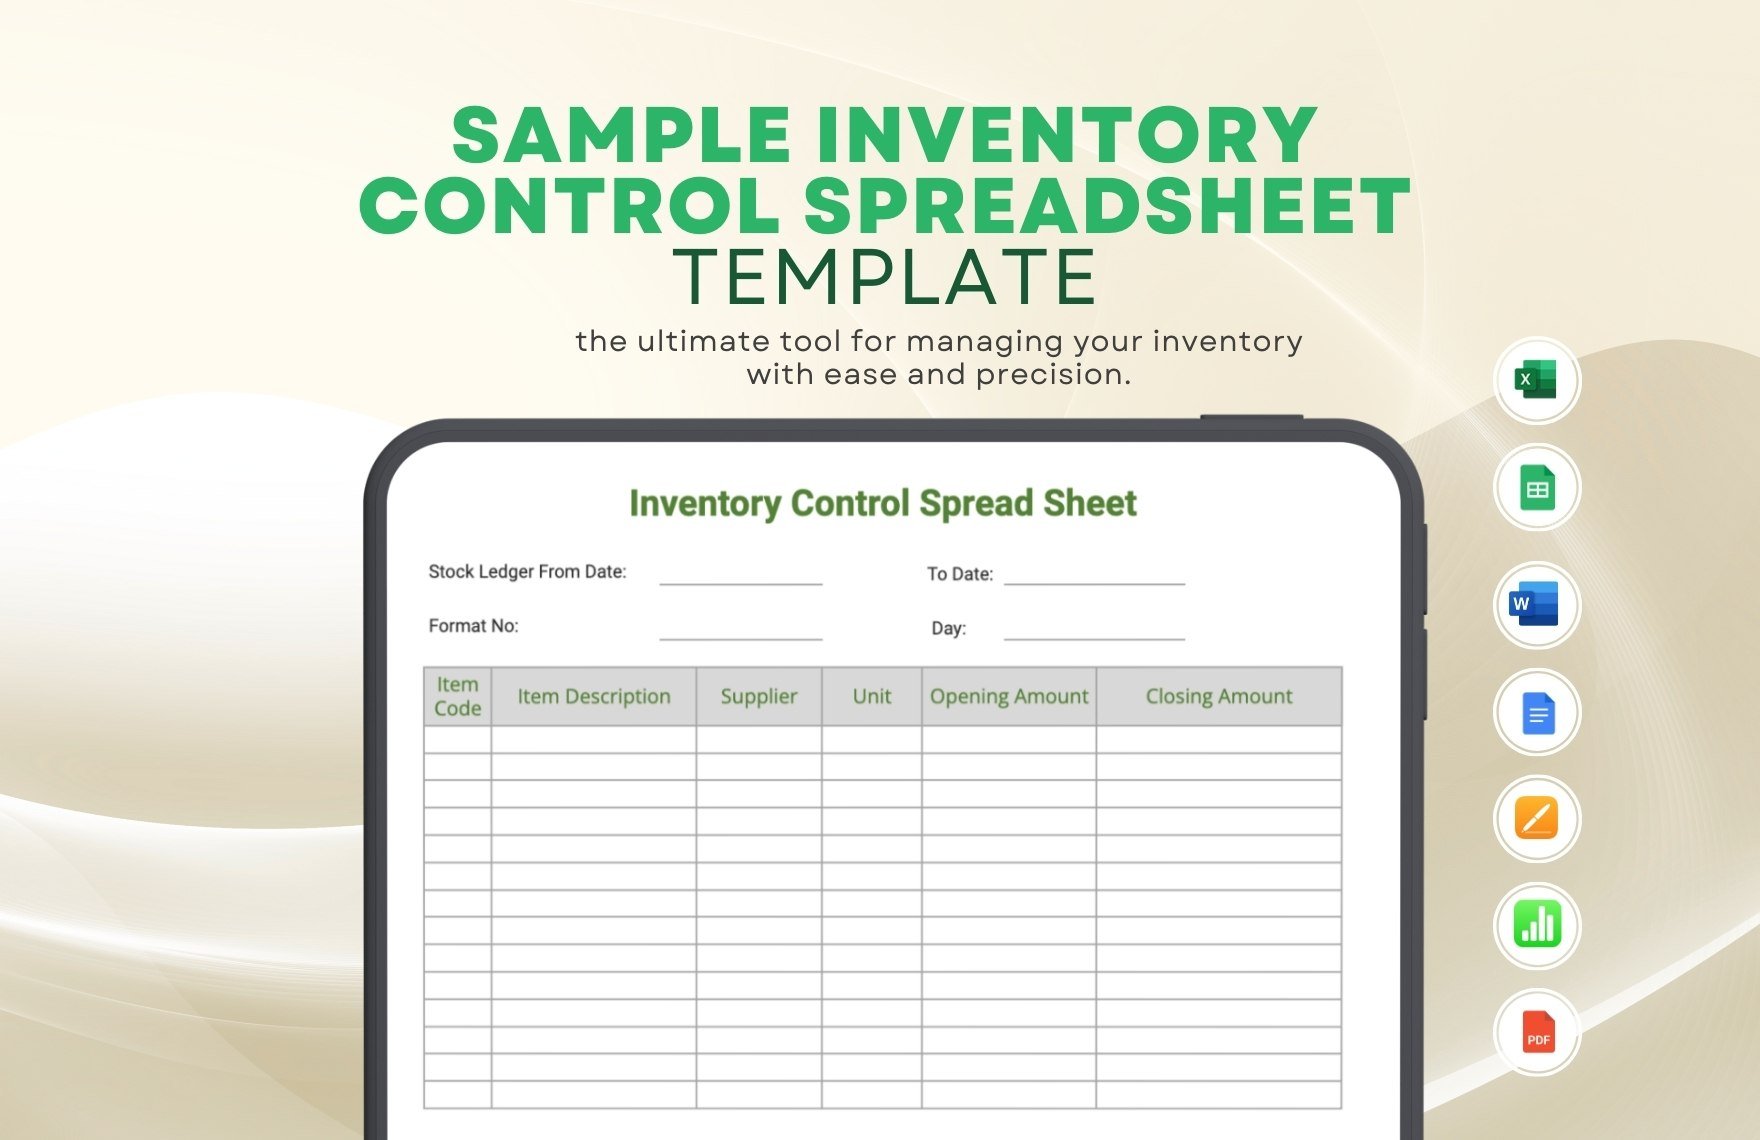 Sample Inventory Control Spreadsheet Template in Word, Google Docs, Excel, PDF, Google Sheets, Apple Pages, Apple Numbers